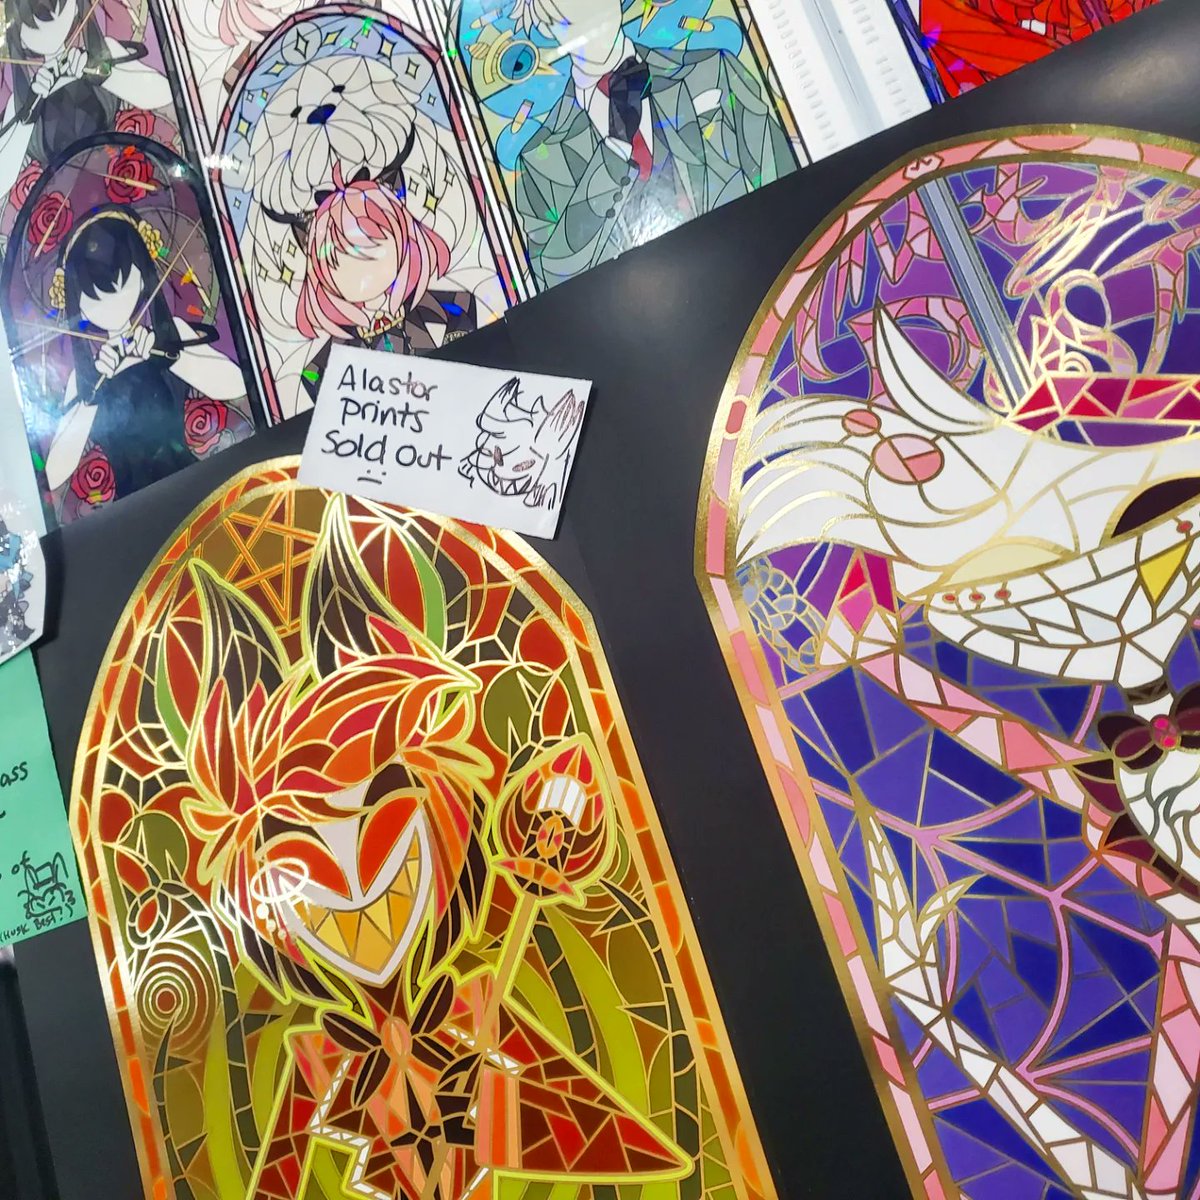 Due to high demand and popularity the #HazbinHotel Stained Glass designs are now available early for online fans! Kinokreations.myshopify.com (new and improved site soft opening) Prints are currently sold out!